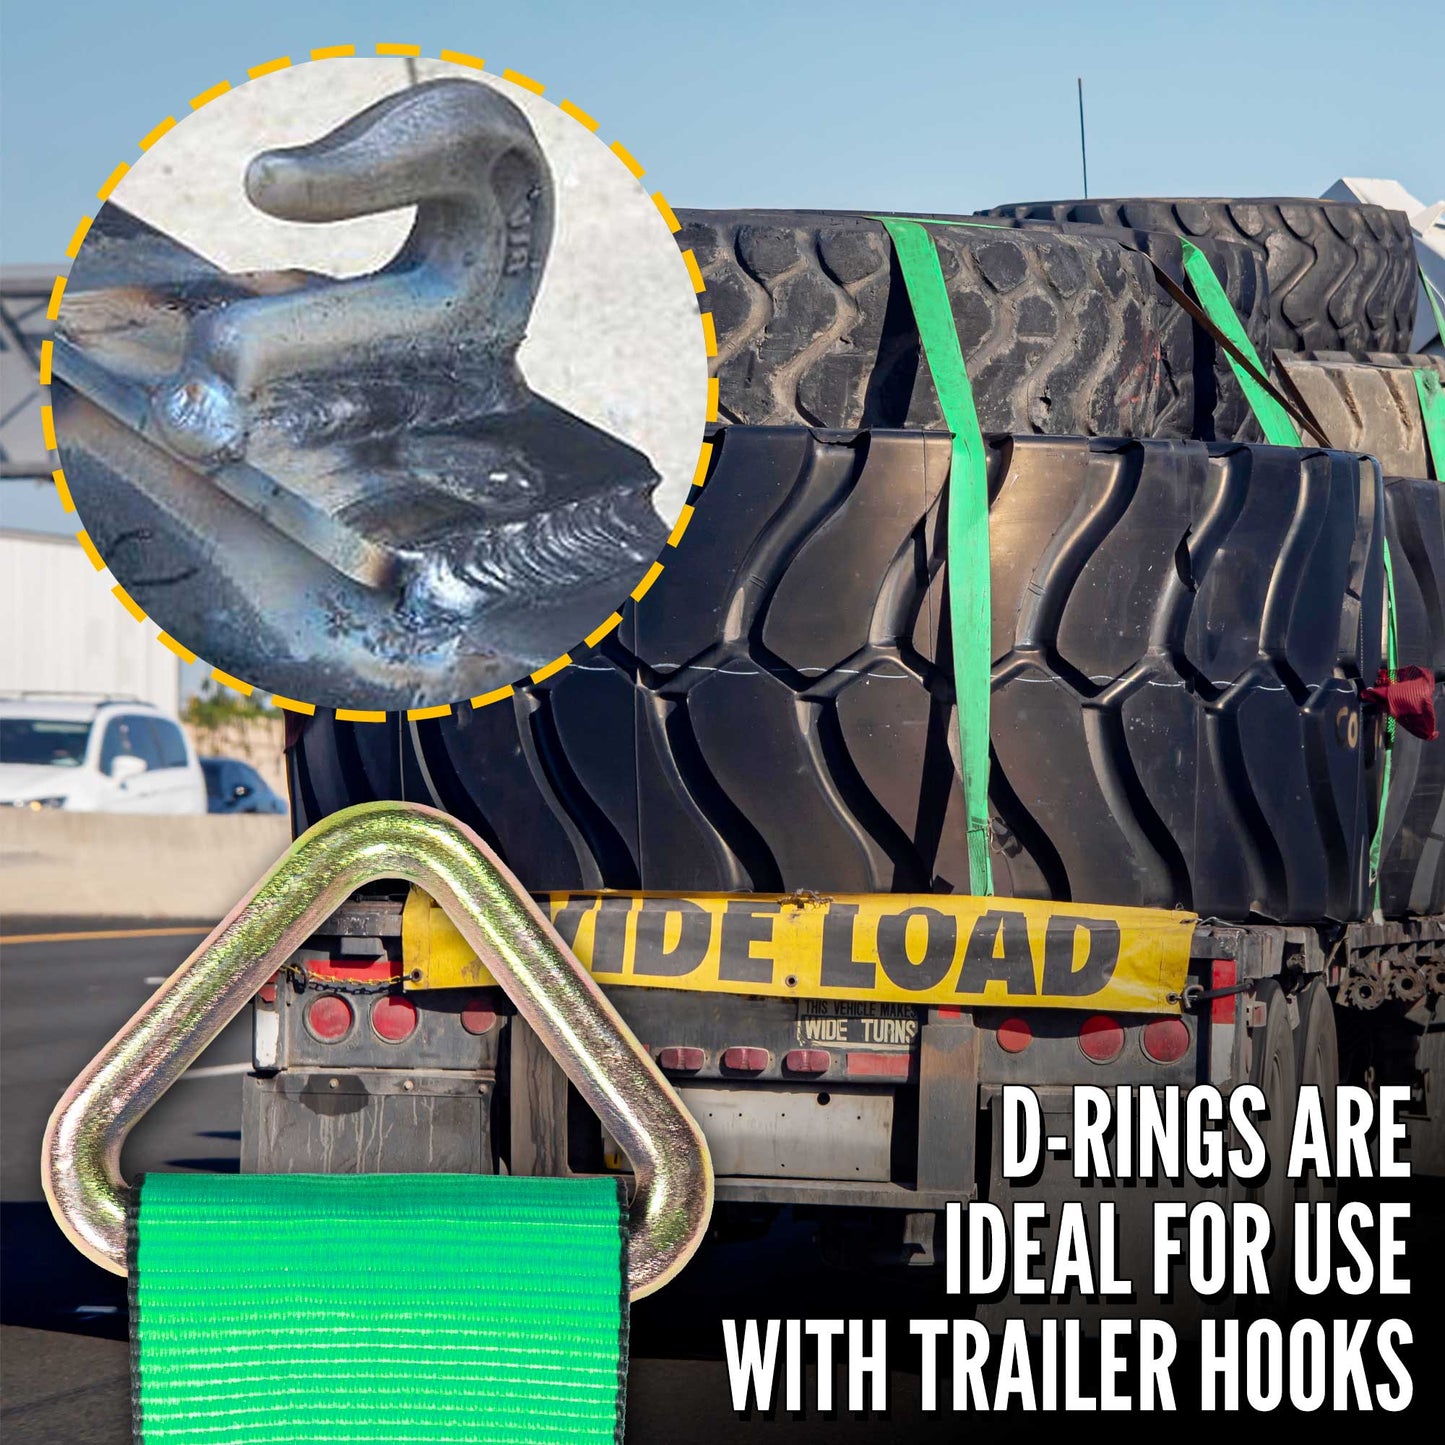 30' D ring straps are ideal for use with trailer hooks